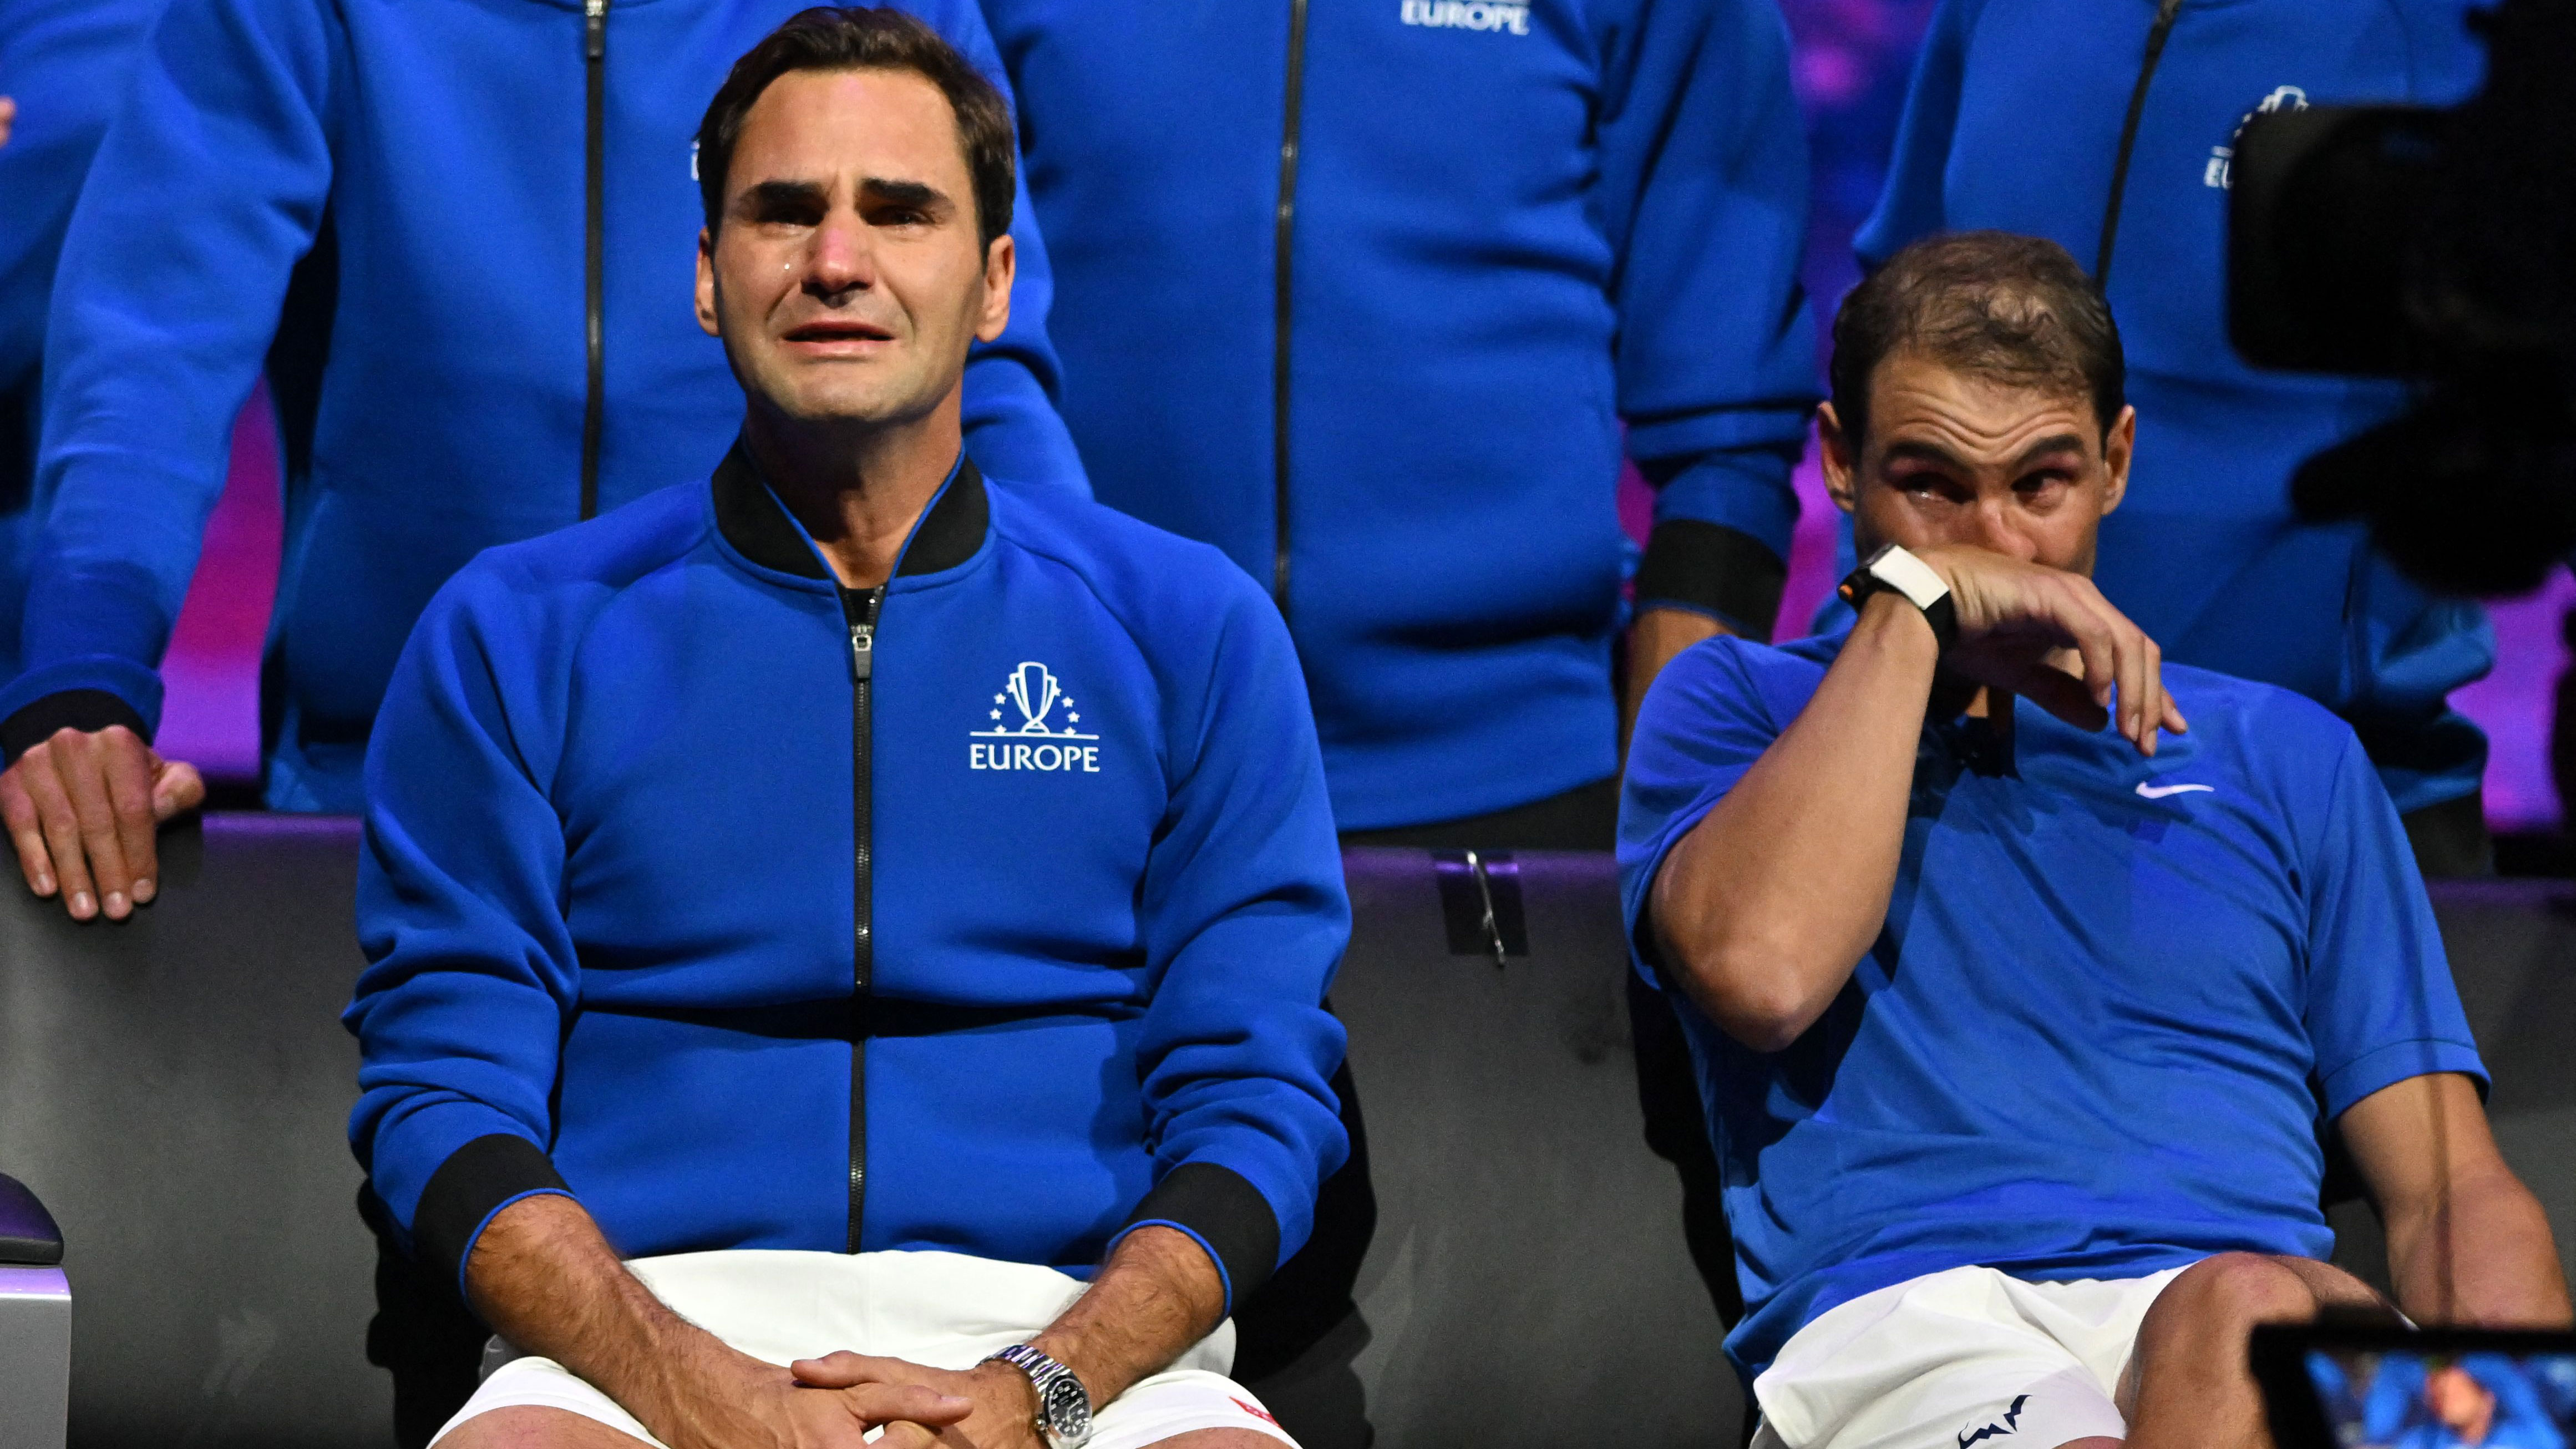 ‘I Think It's the End': Federer Reflects on Calling Nadal to Play
Last Match of Career